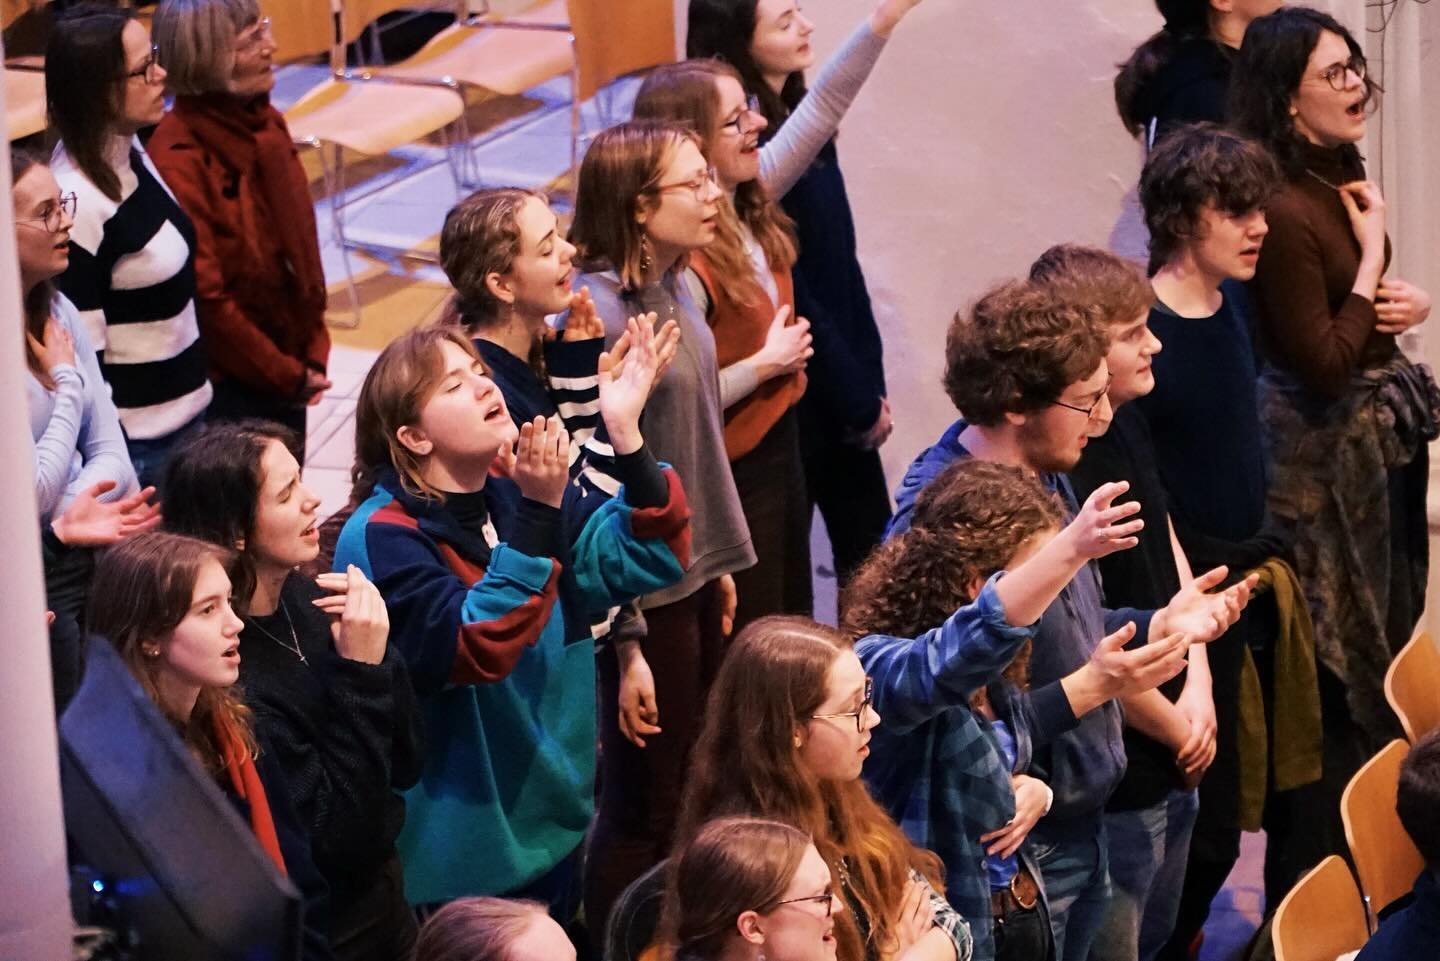 How have you been filled with wonder this week? Or how have you been reminded of God&rsquo;s glory? 💭 Tell us in the comments! ⬇️

#HTCambridge #ChurchInCambridge #AChurchForTheCity #Worship #Wonder